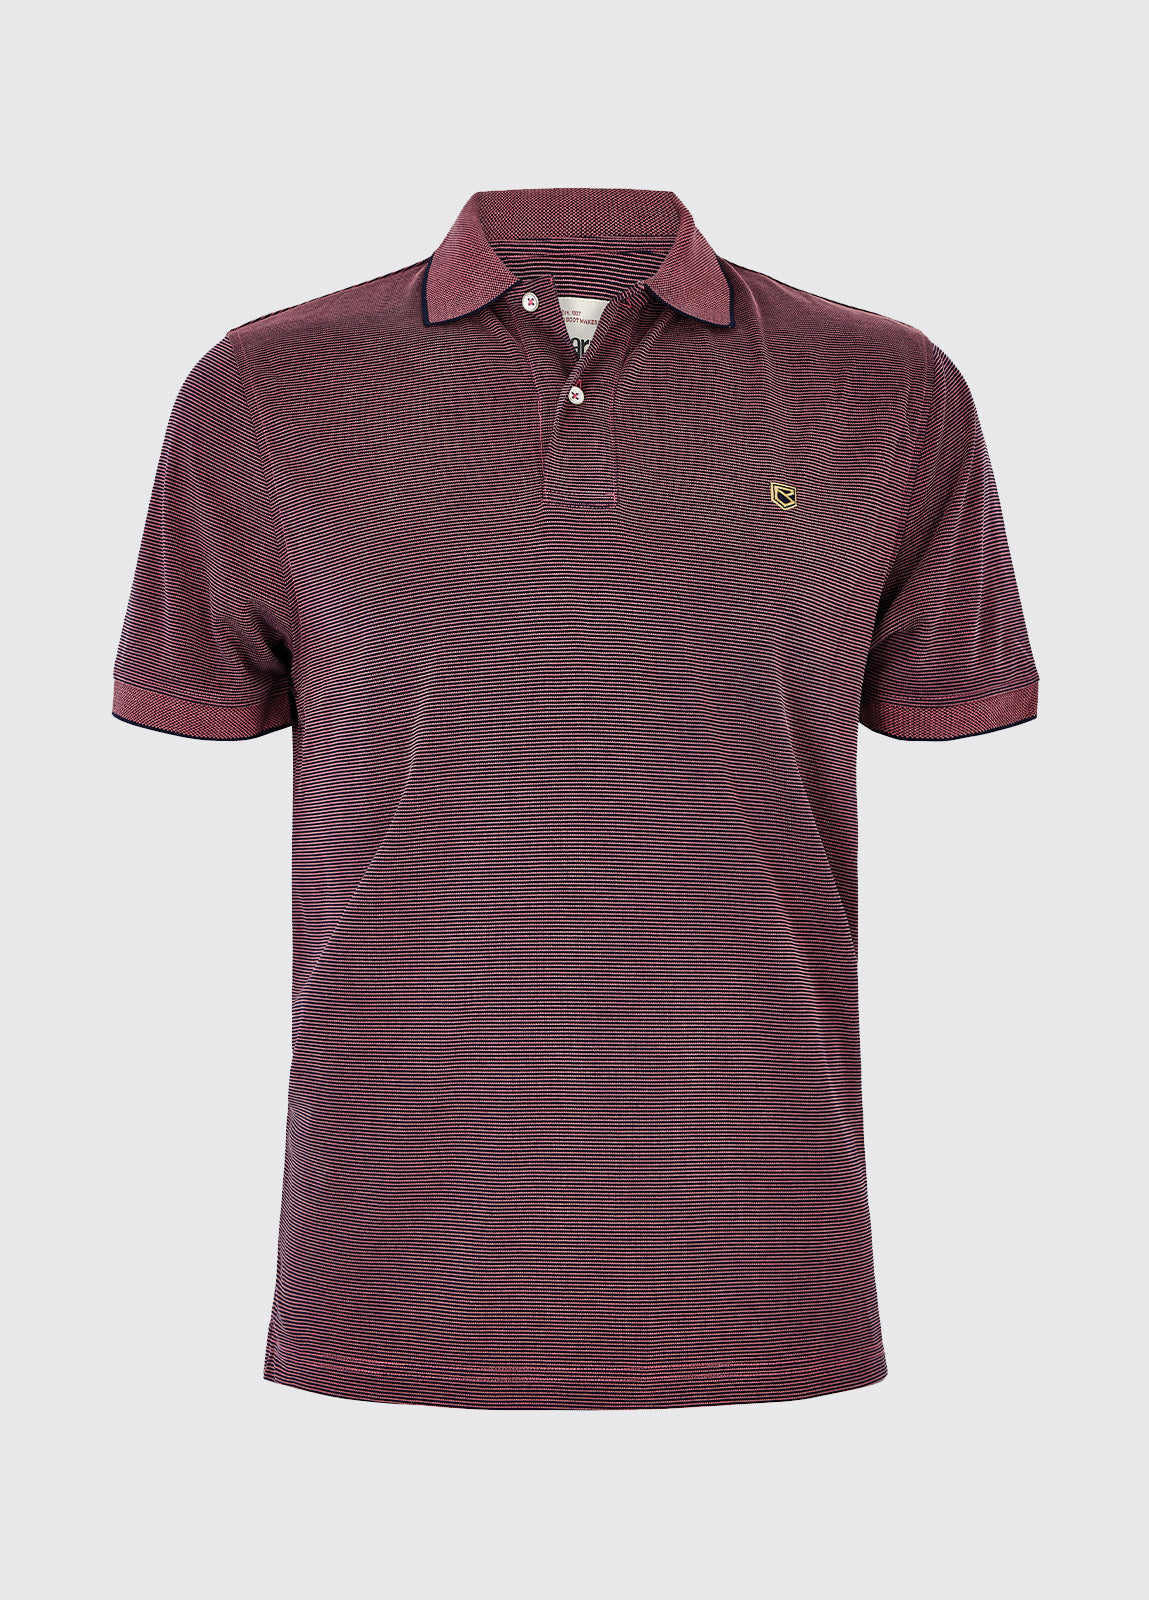 Mullaghmore Striped Polo - Ruby